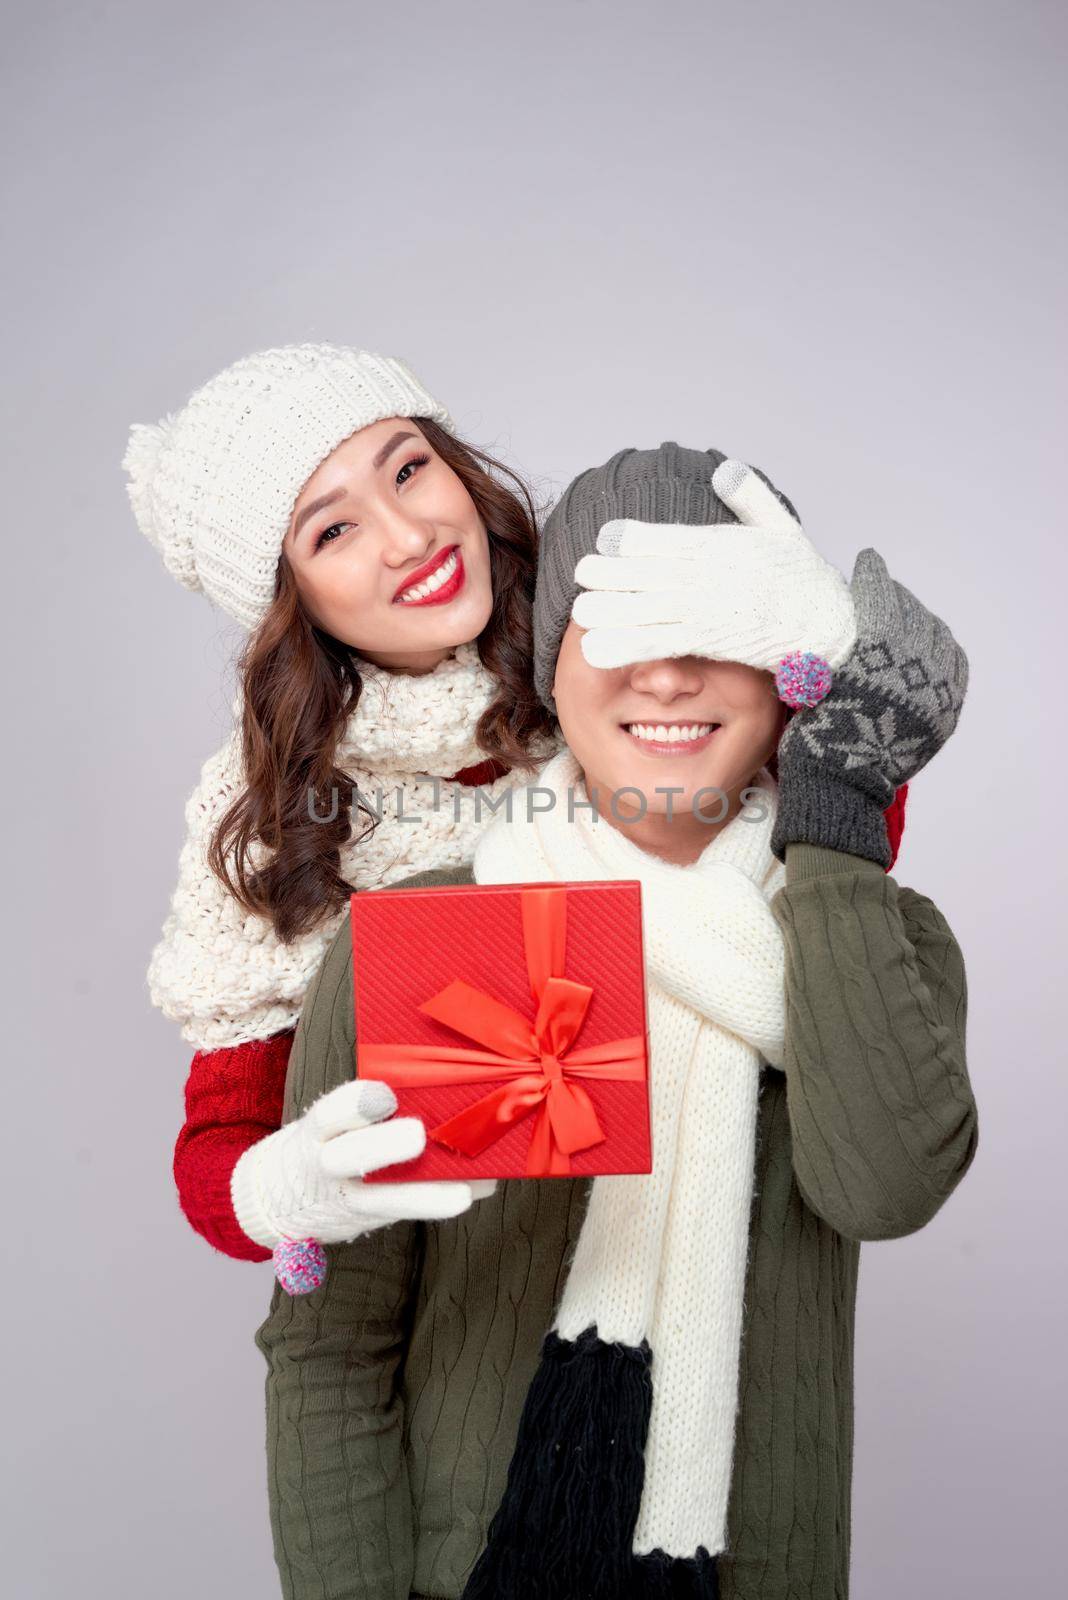 Couple gift. Young woman giving gift to boyfriend on white background